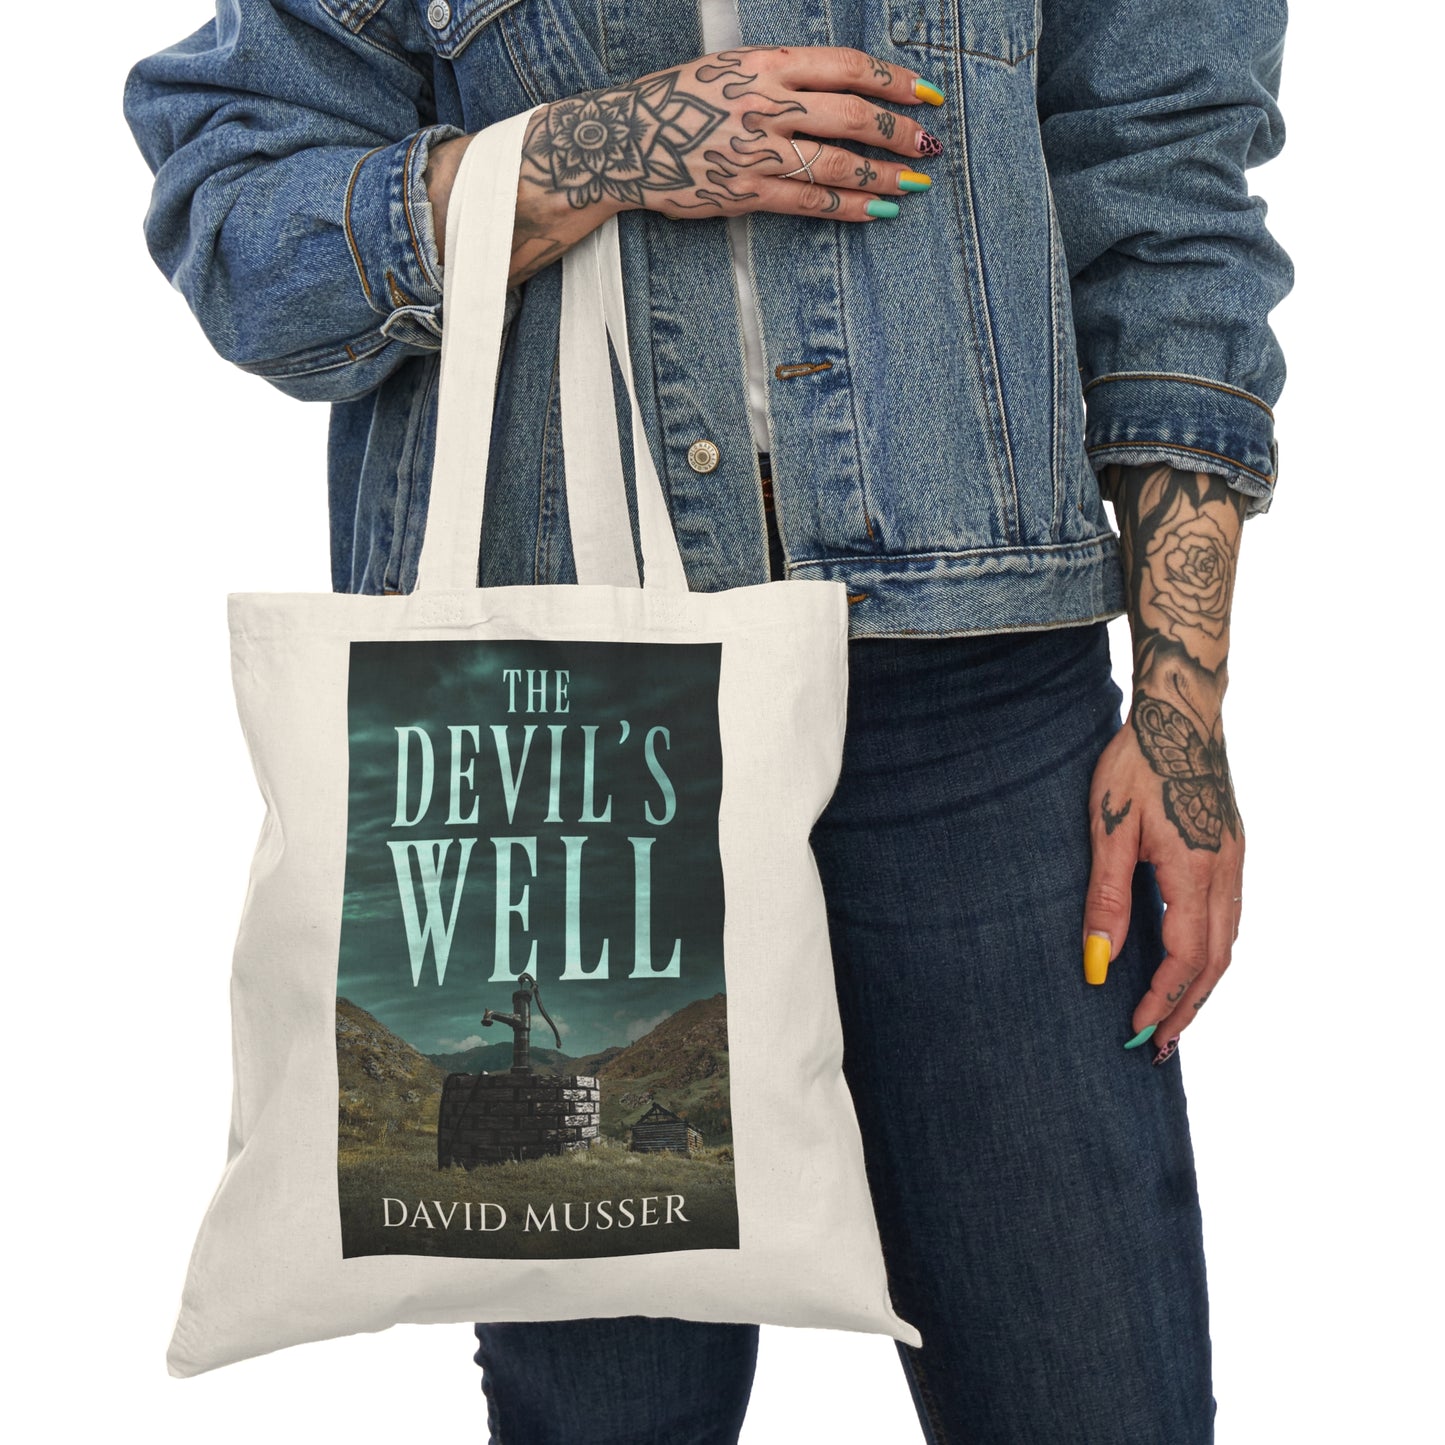 The Devil's Well - Natural Tote Bag